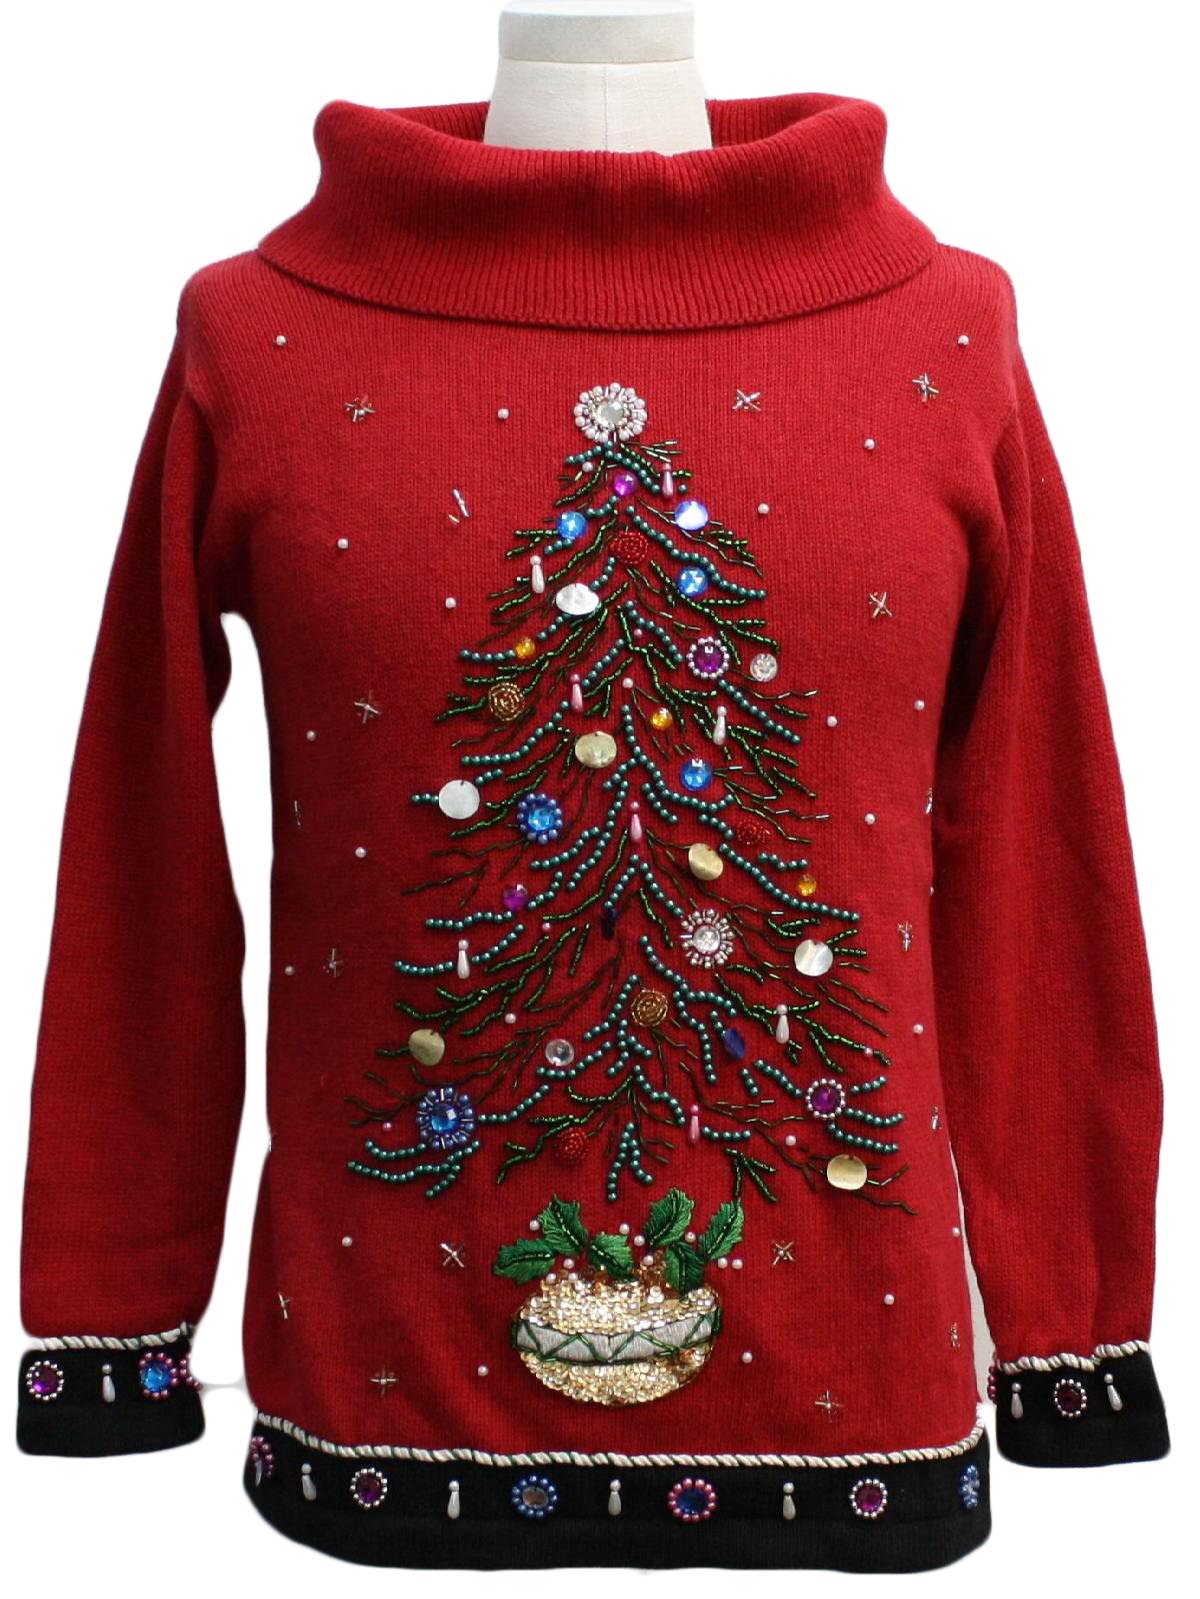 Mens Ugly Christmas Sweater 2021